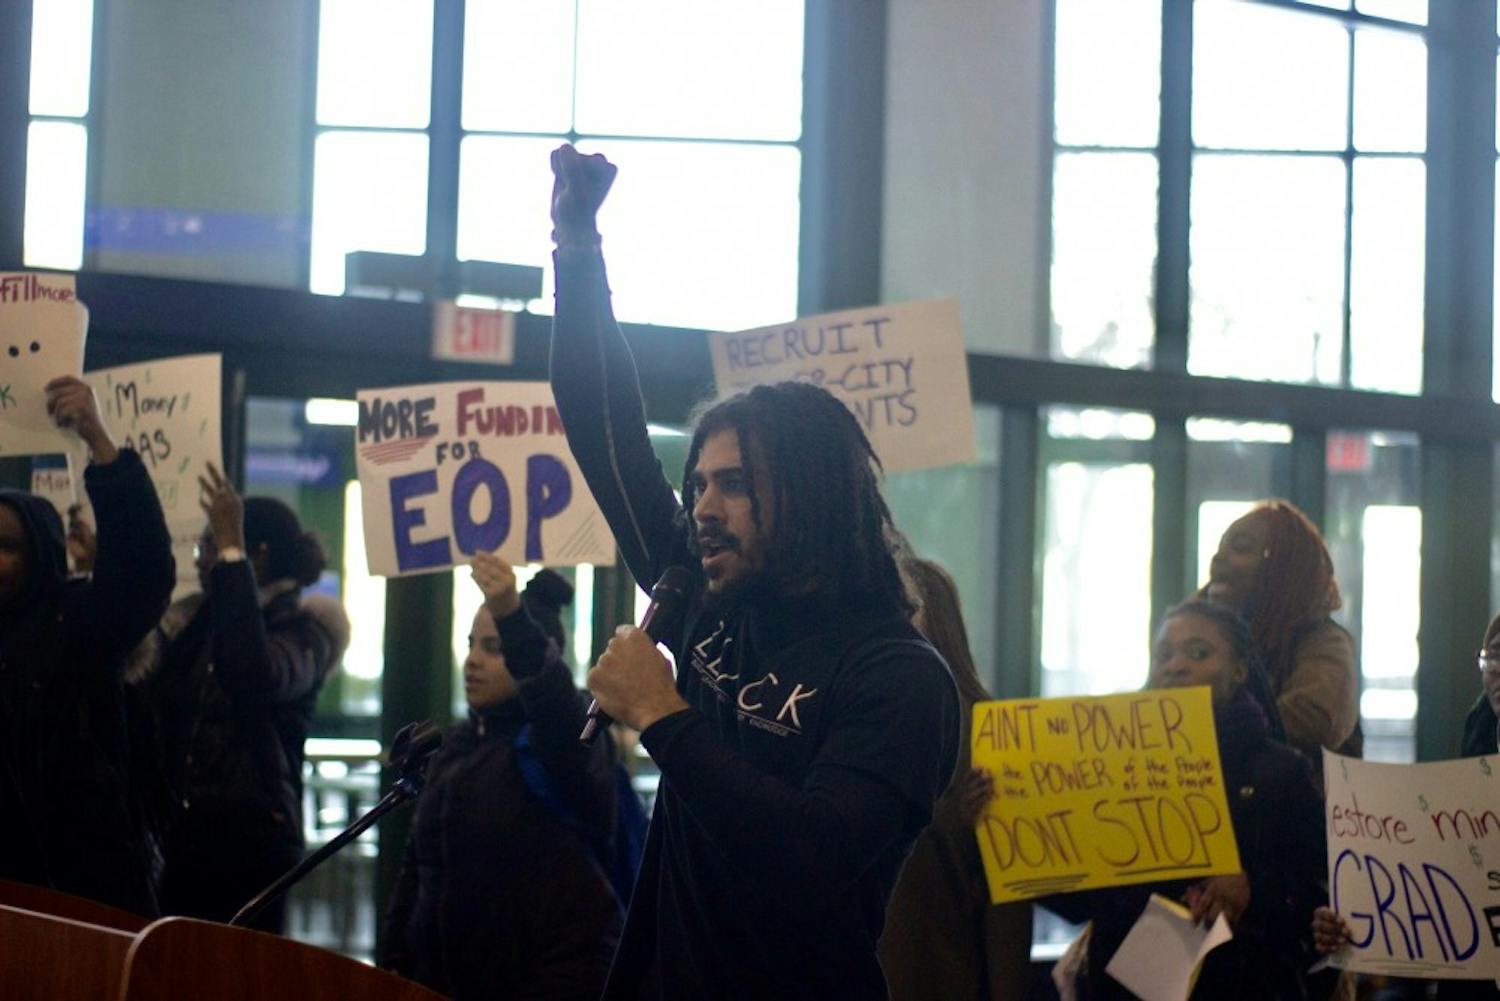 &nbsp;Students demonstrated in the Student Union Friday afternoon and demanded UB change the name of buildings named after Millard Fillmore, increase black faculty and provide more funding for EOP.&nbsp;